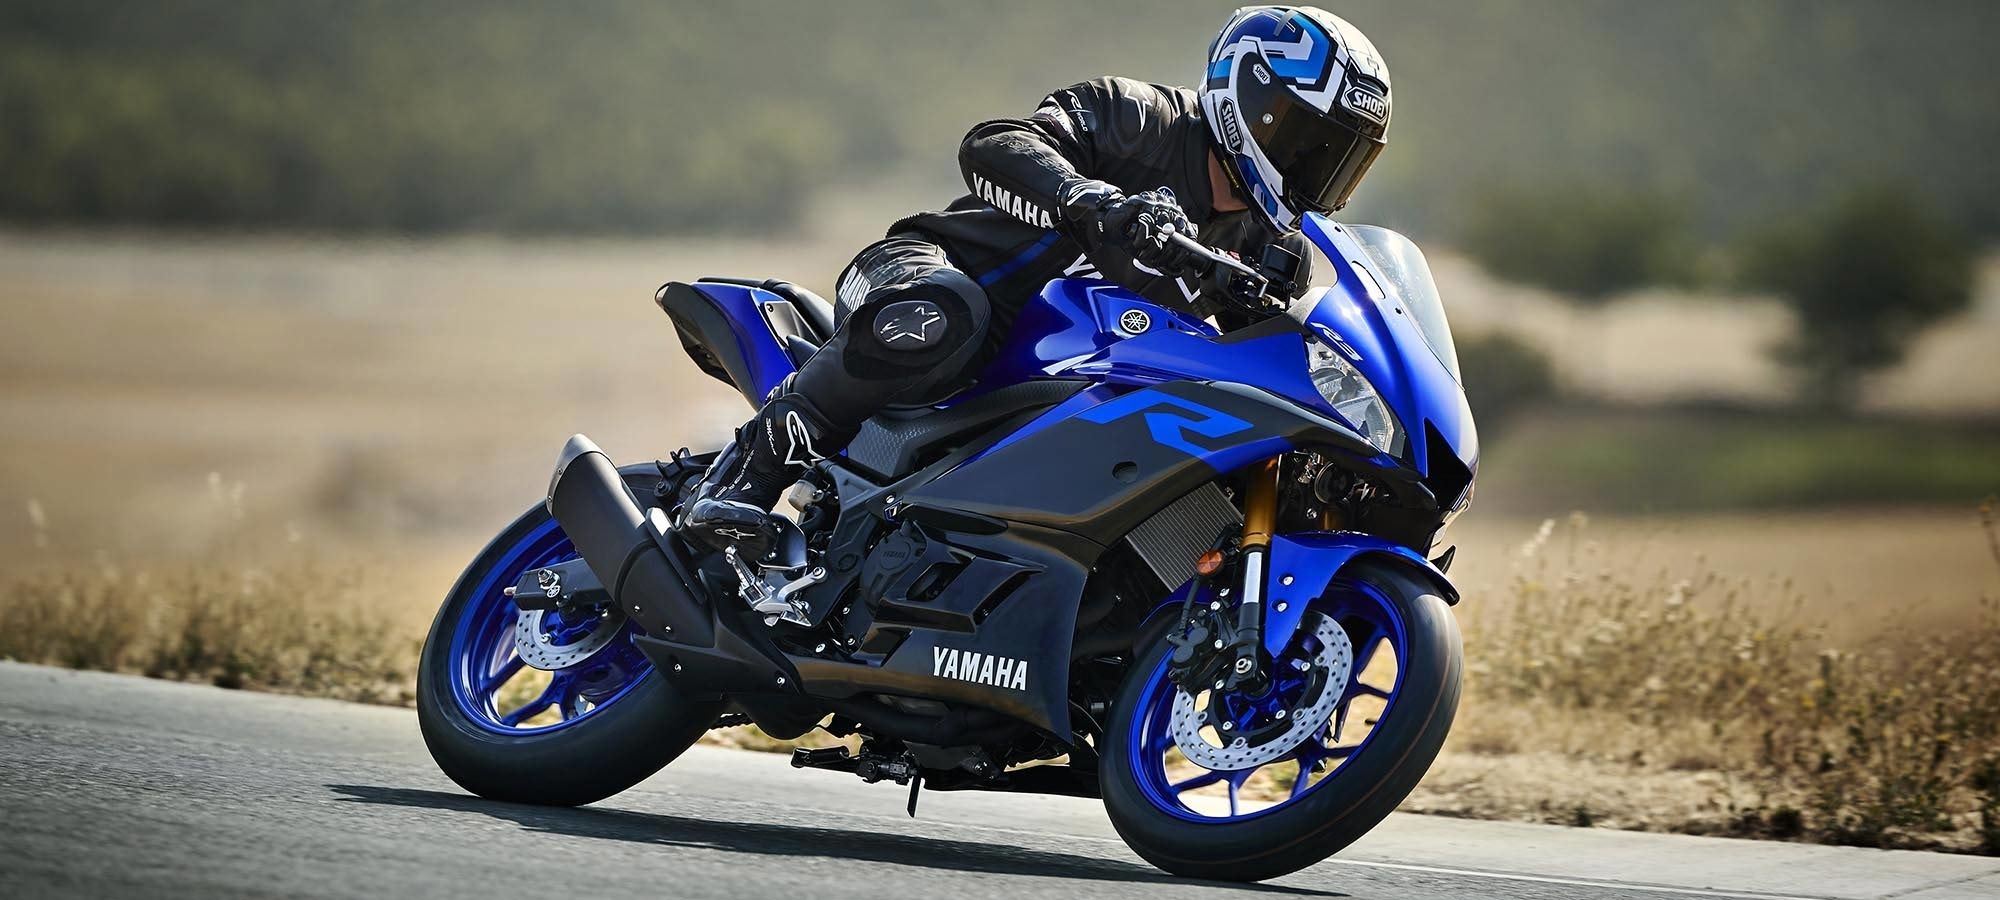 Yamaha Yzf R3 Gets Upgraded For Cycle World